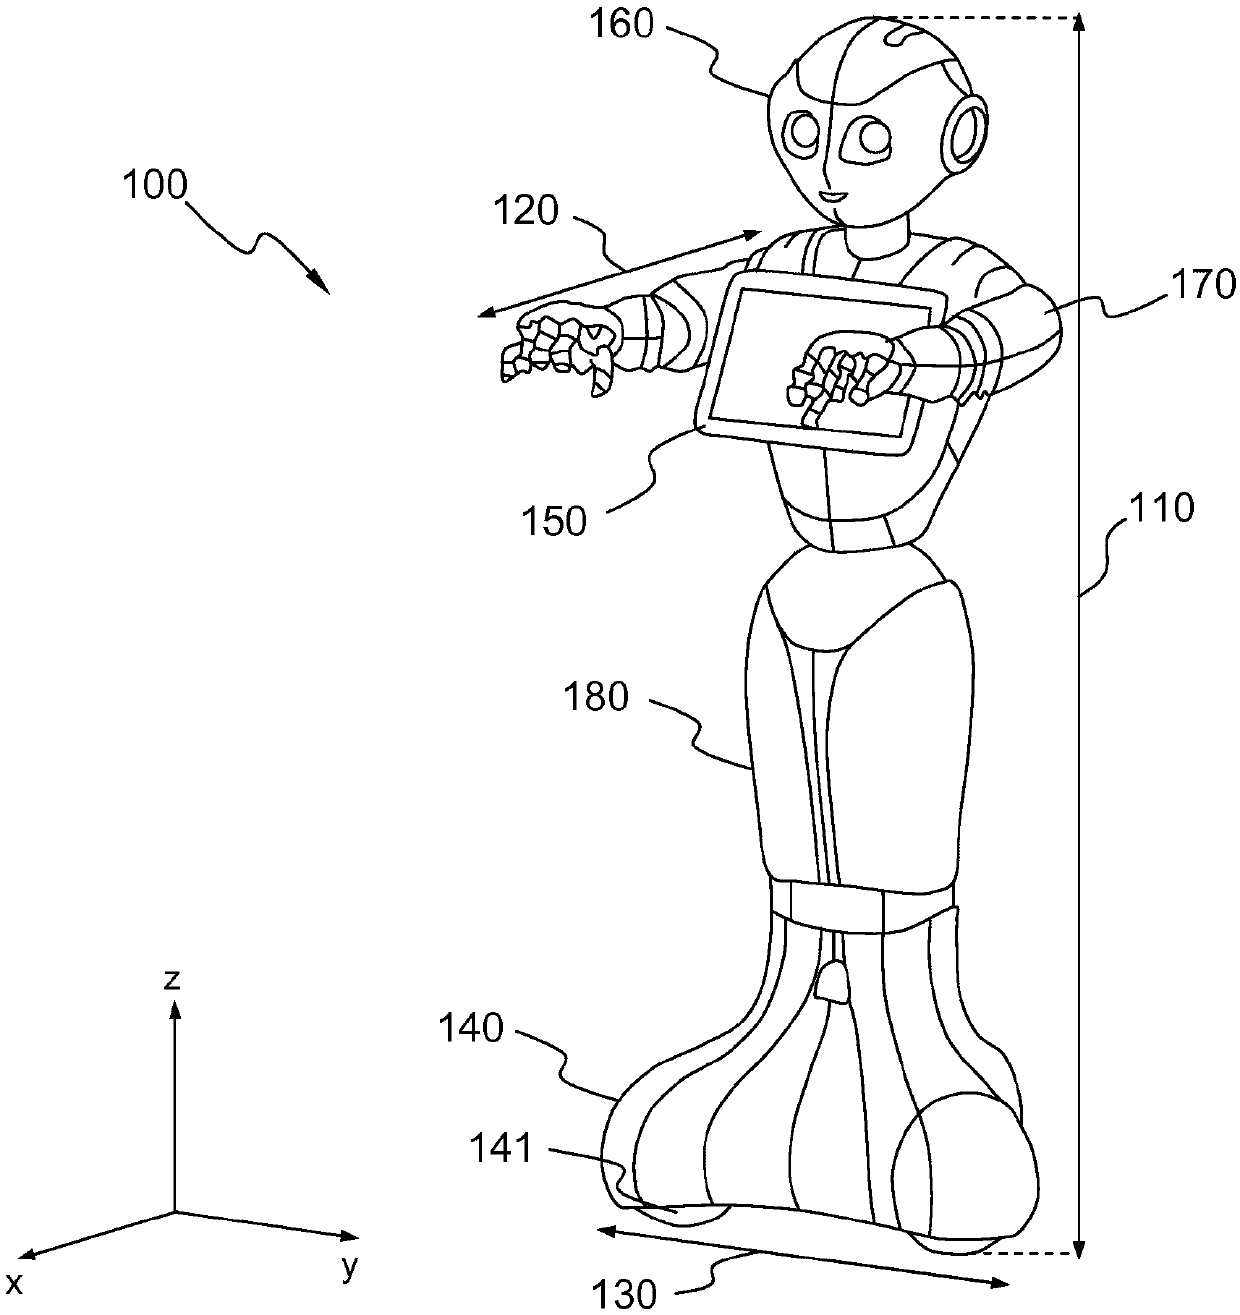 Omnidirectional Wheeled Humanoid Robot Based on Linear Prediction Position and Velocity Controller